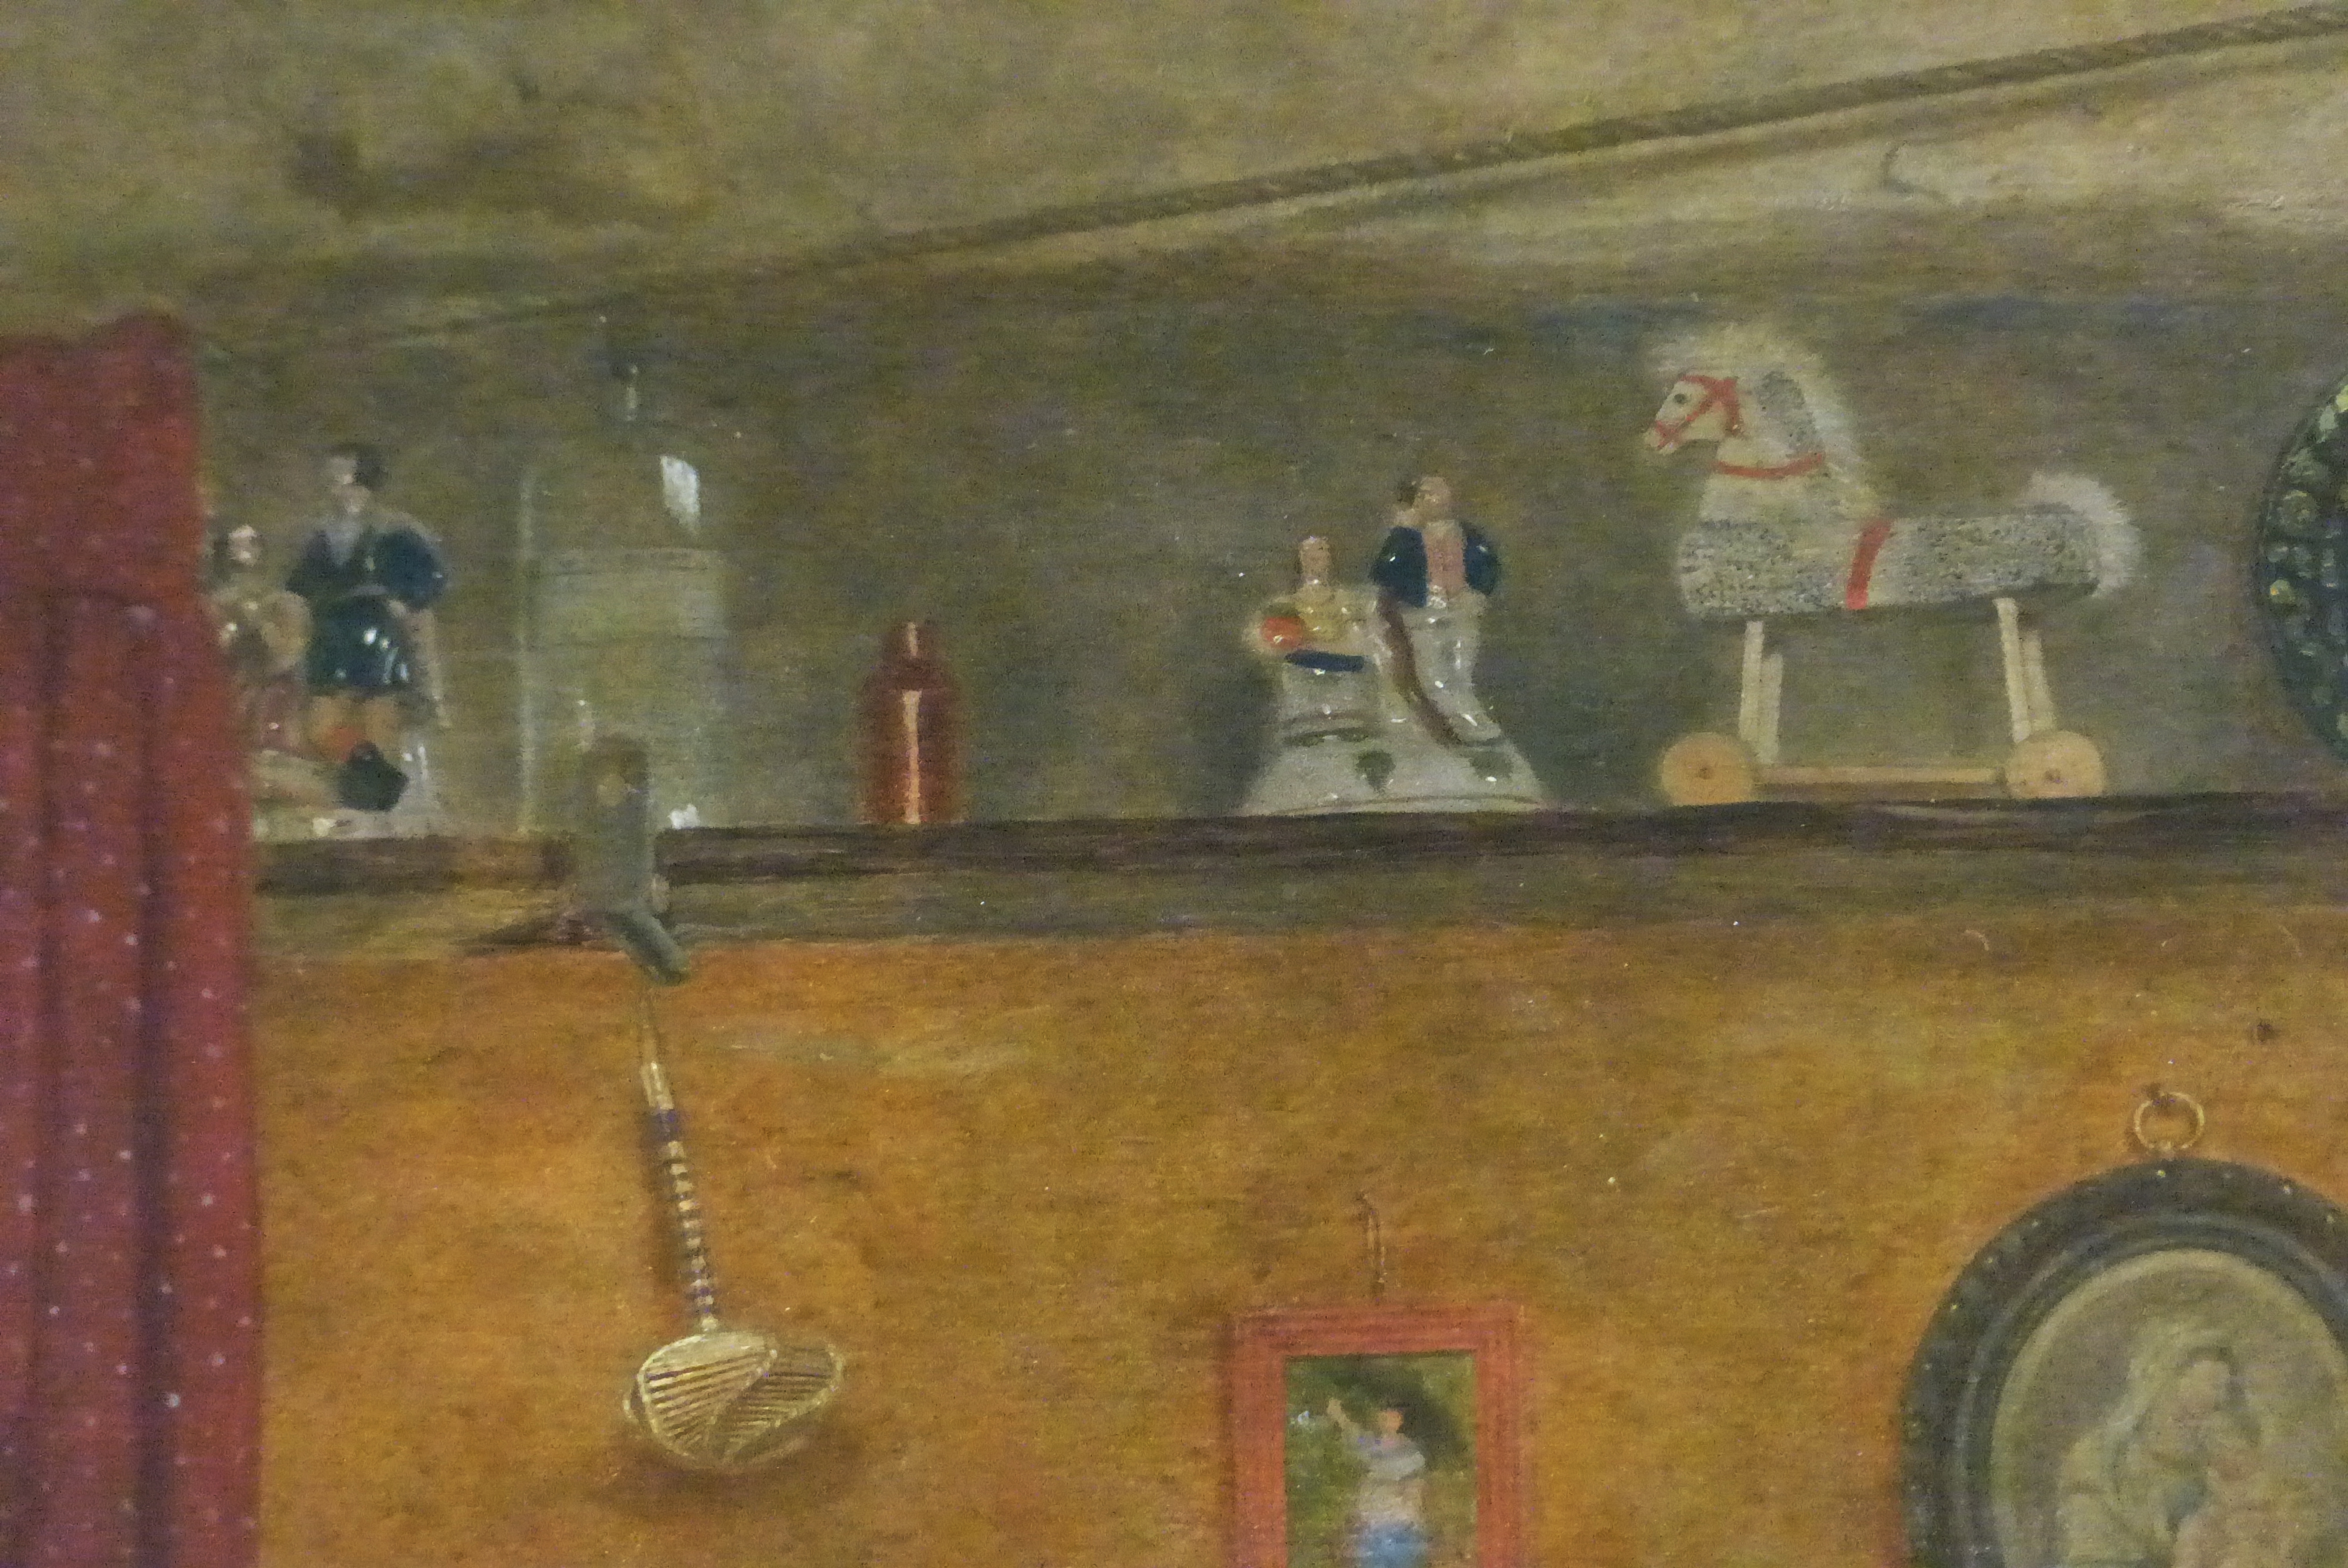 Detail of figurines on mantelpiece in Collinson painting